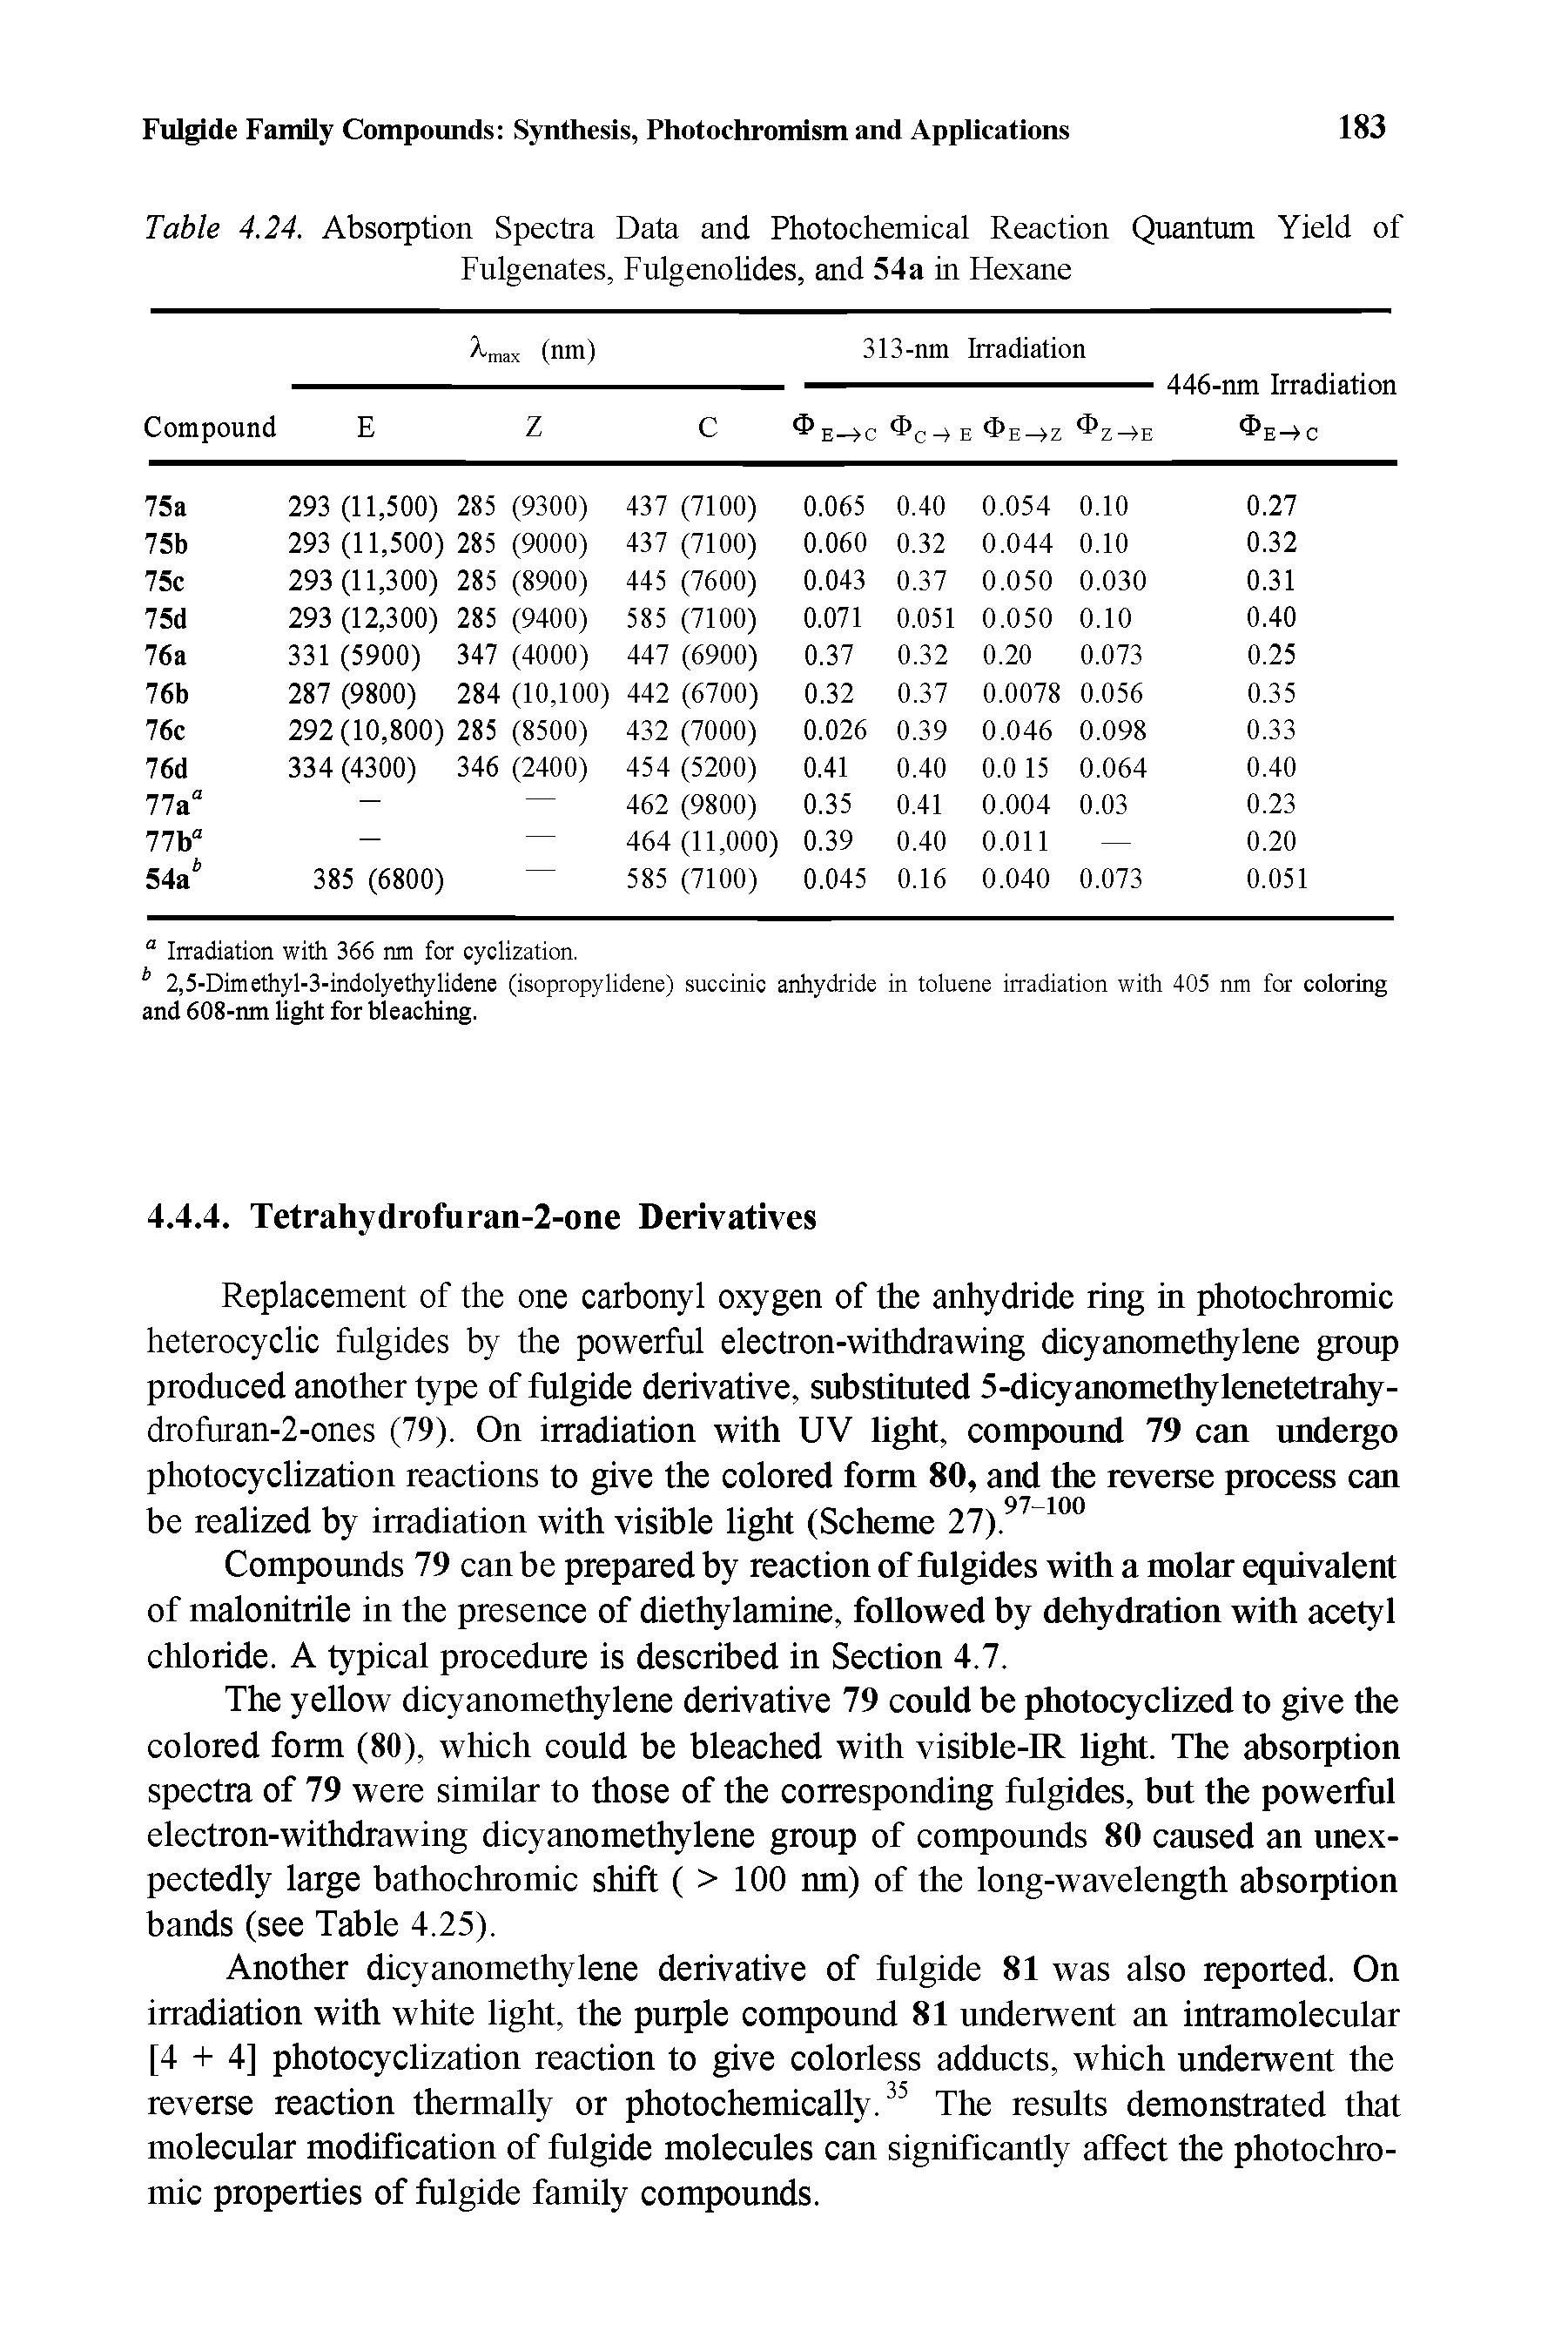 Table 4.24. Absorption Spectra Data and Photochemical Reaction Quantum Yield of Fulgenates, Fulgenolides, and 54a in Flexane...